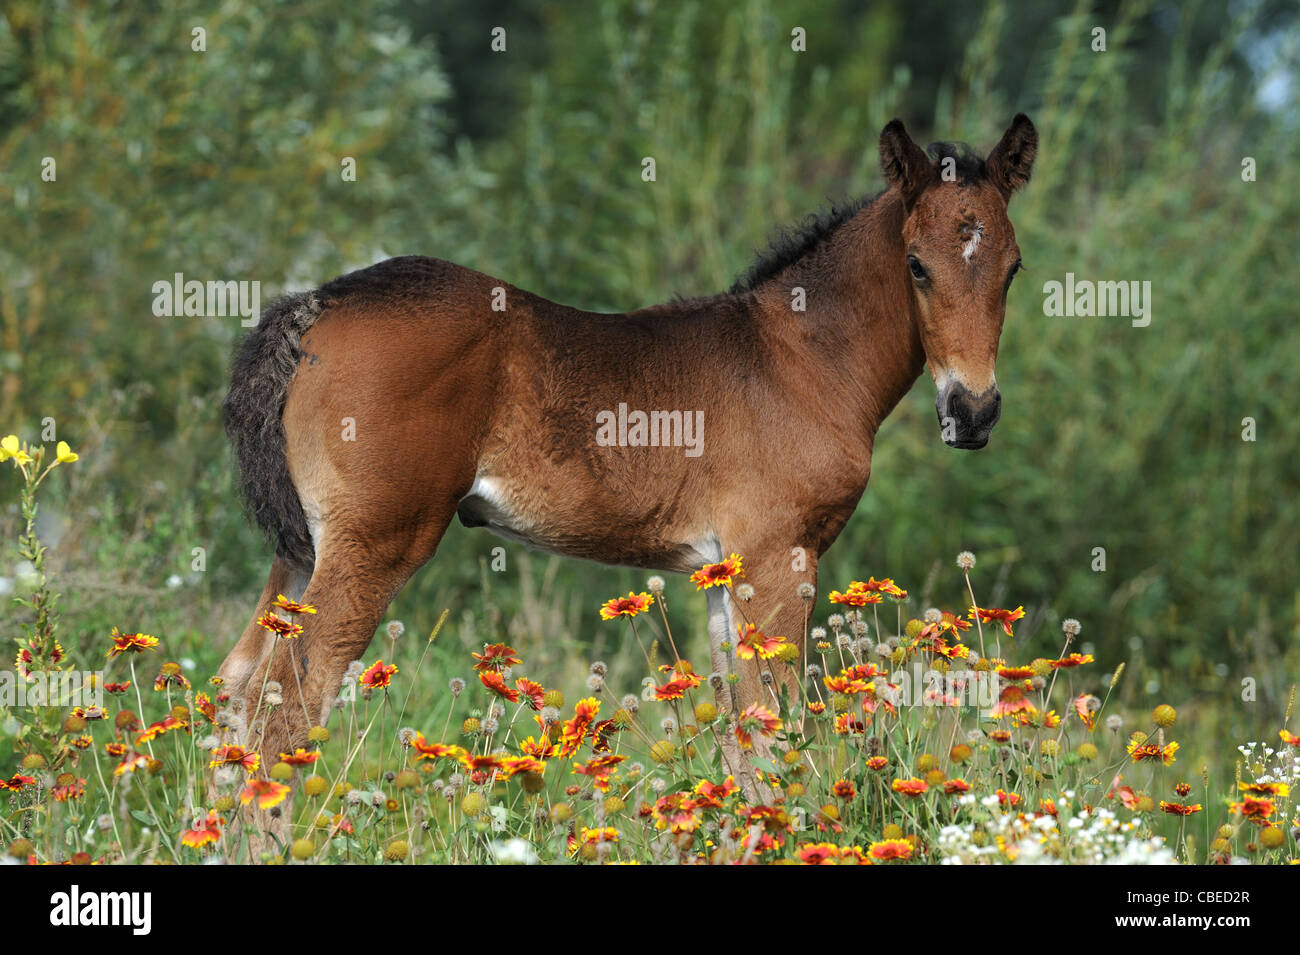 Curly Horse (Equus ferus caballus). Foal standing in a flowering meadow. Stock Photo